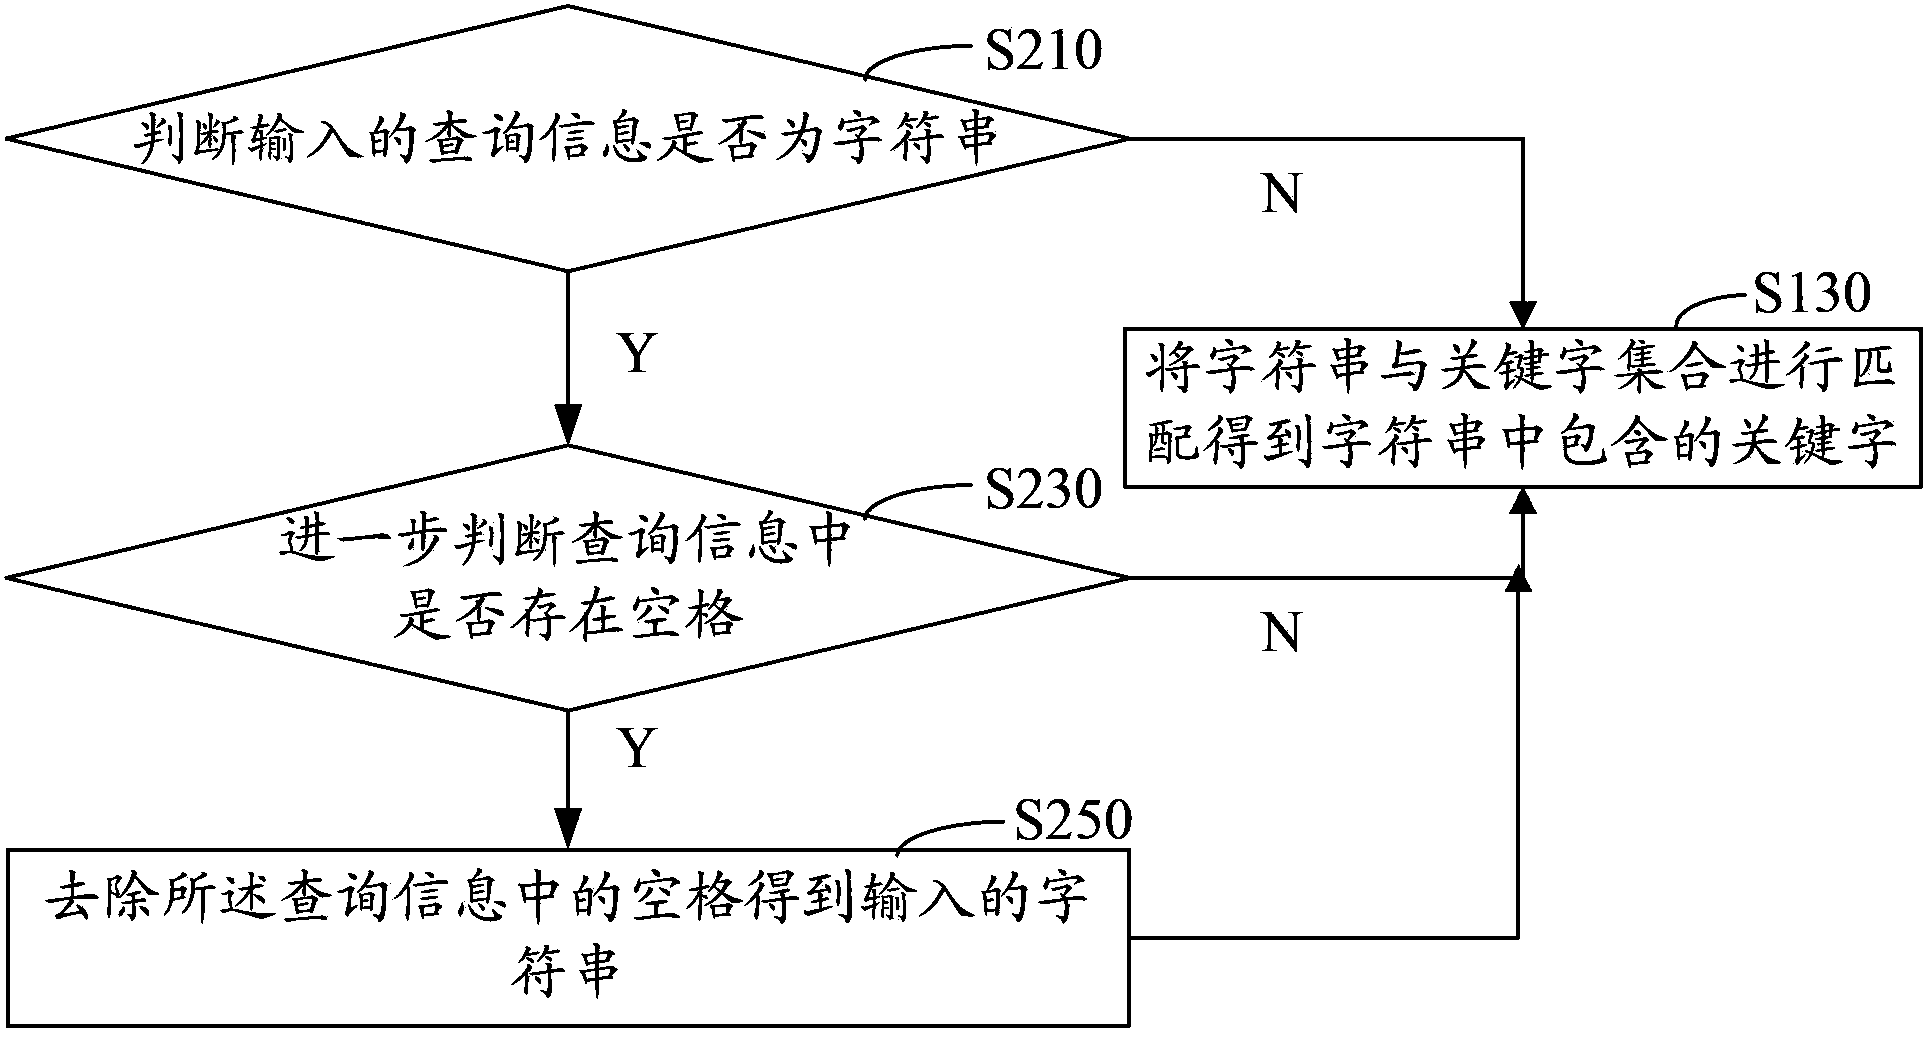 Question and answer interaction method and system of electronic commerce transaction platform